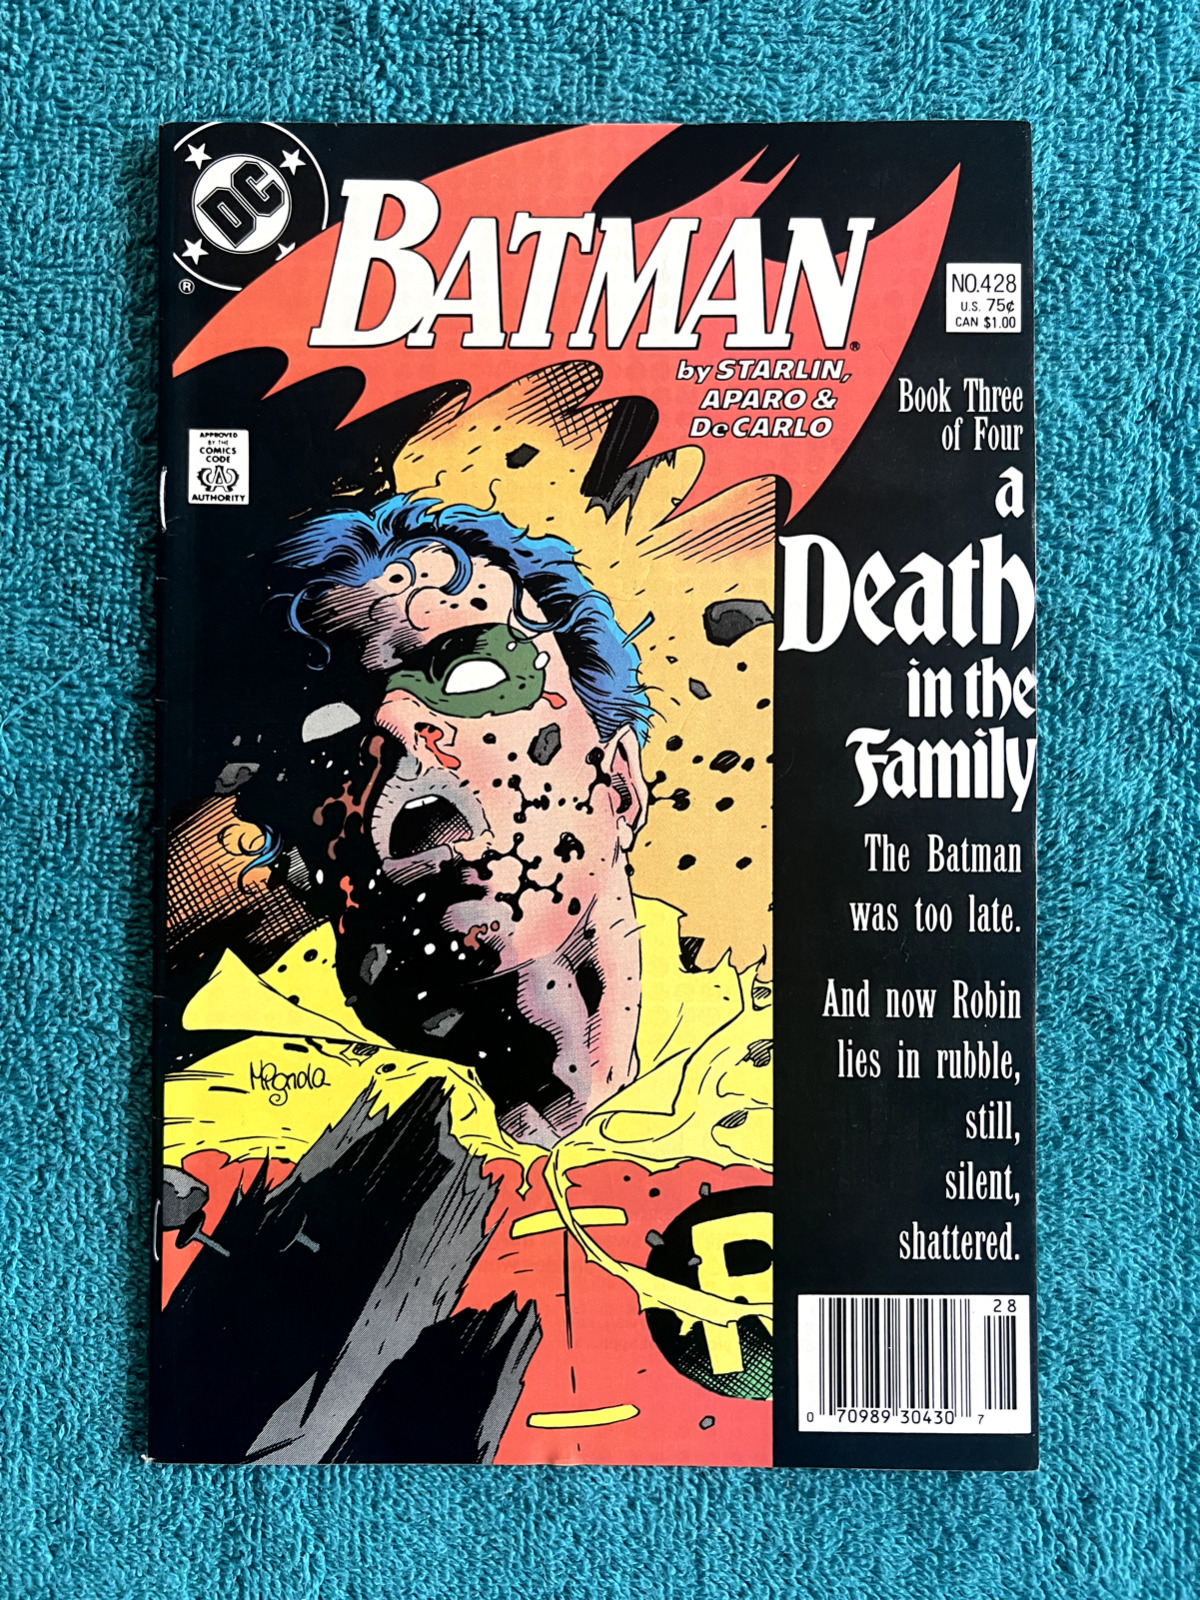 Batman #428 DC  A Death in the Family  Very Fine  Death of Jason Todd Part 3